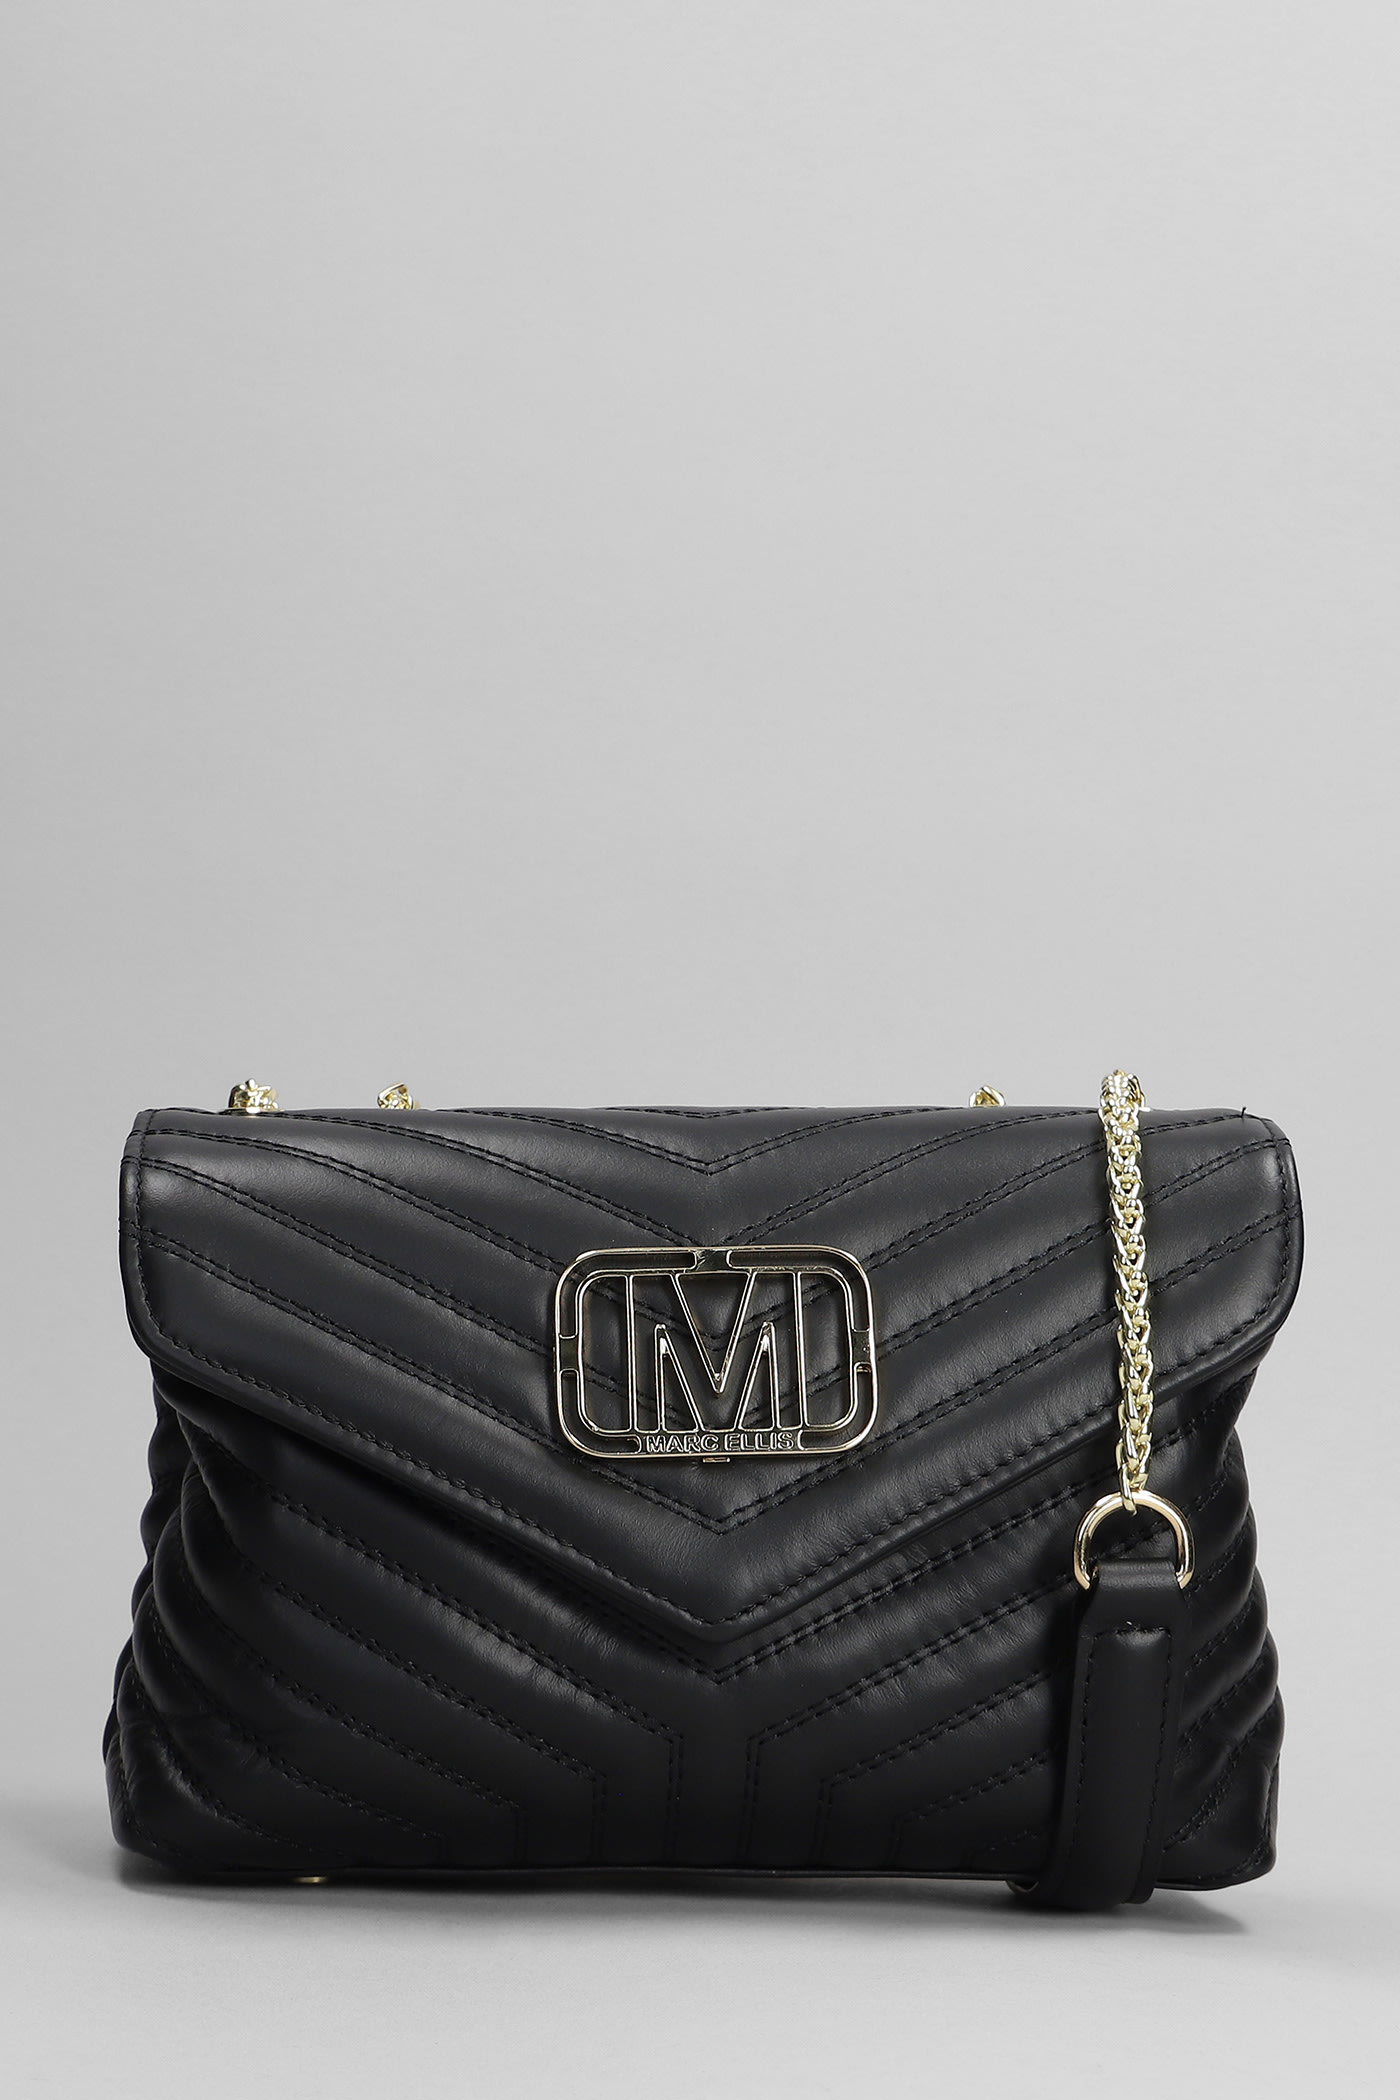 Ginnie S Sa Shoulder Bag In Black Leather